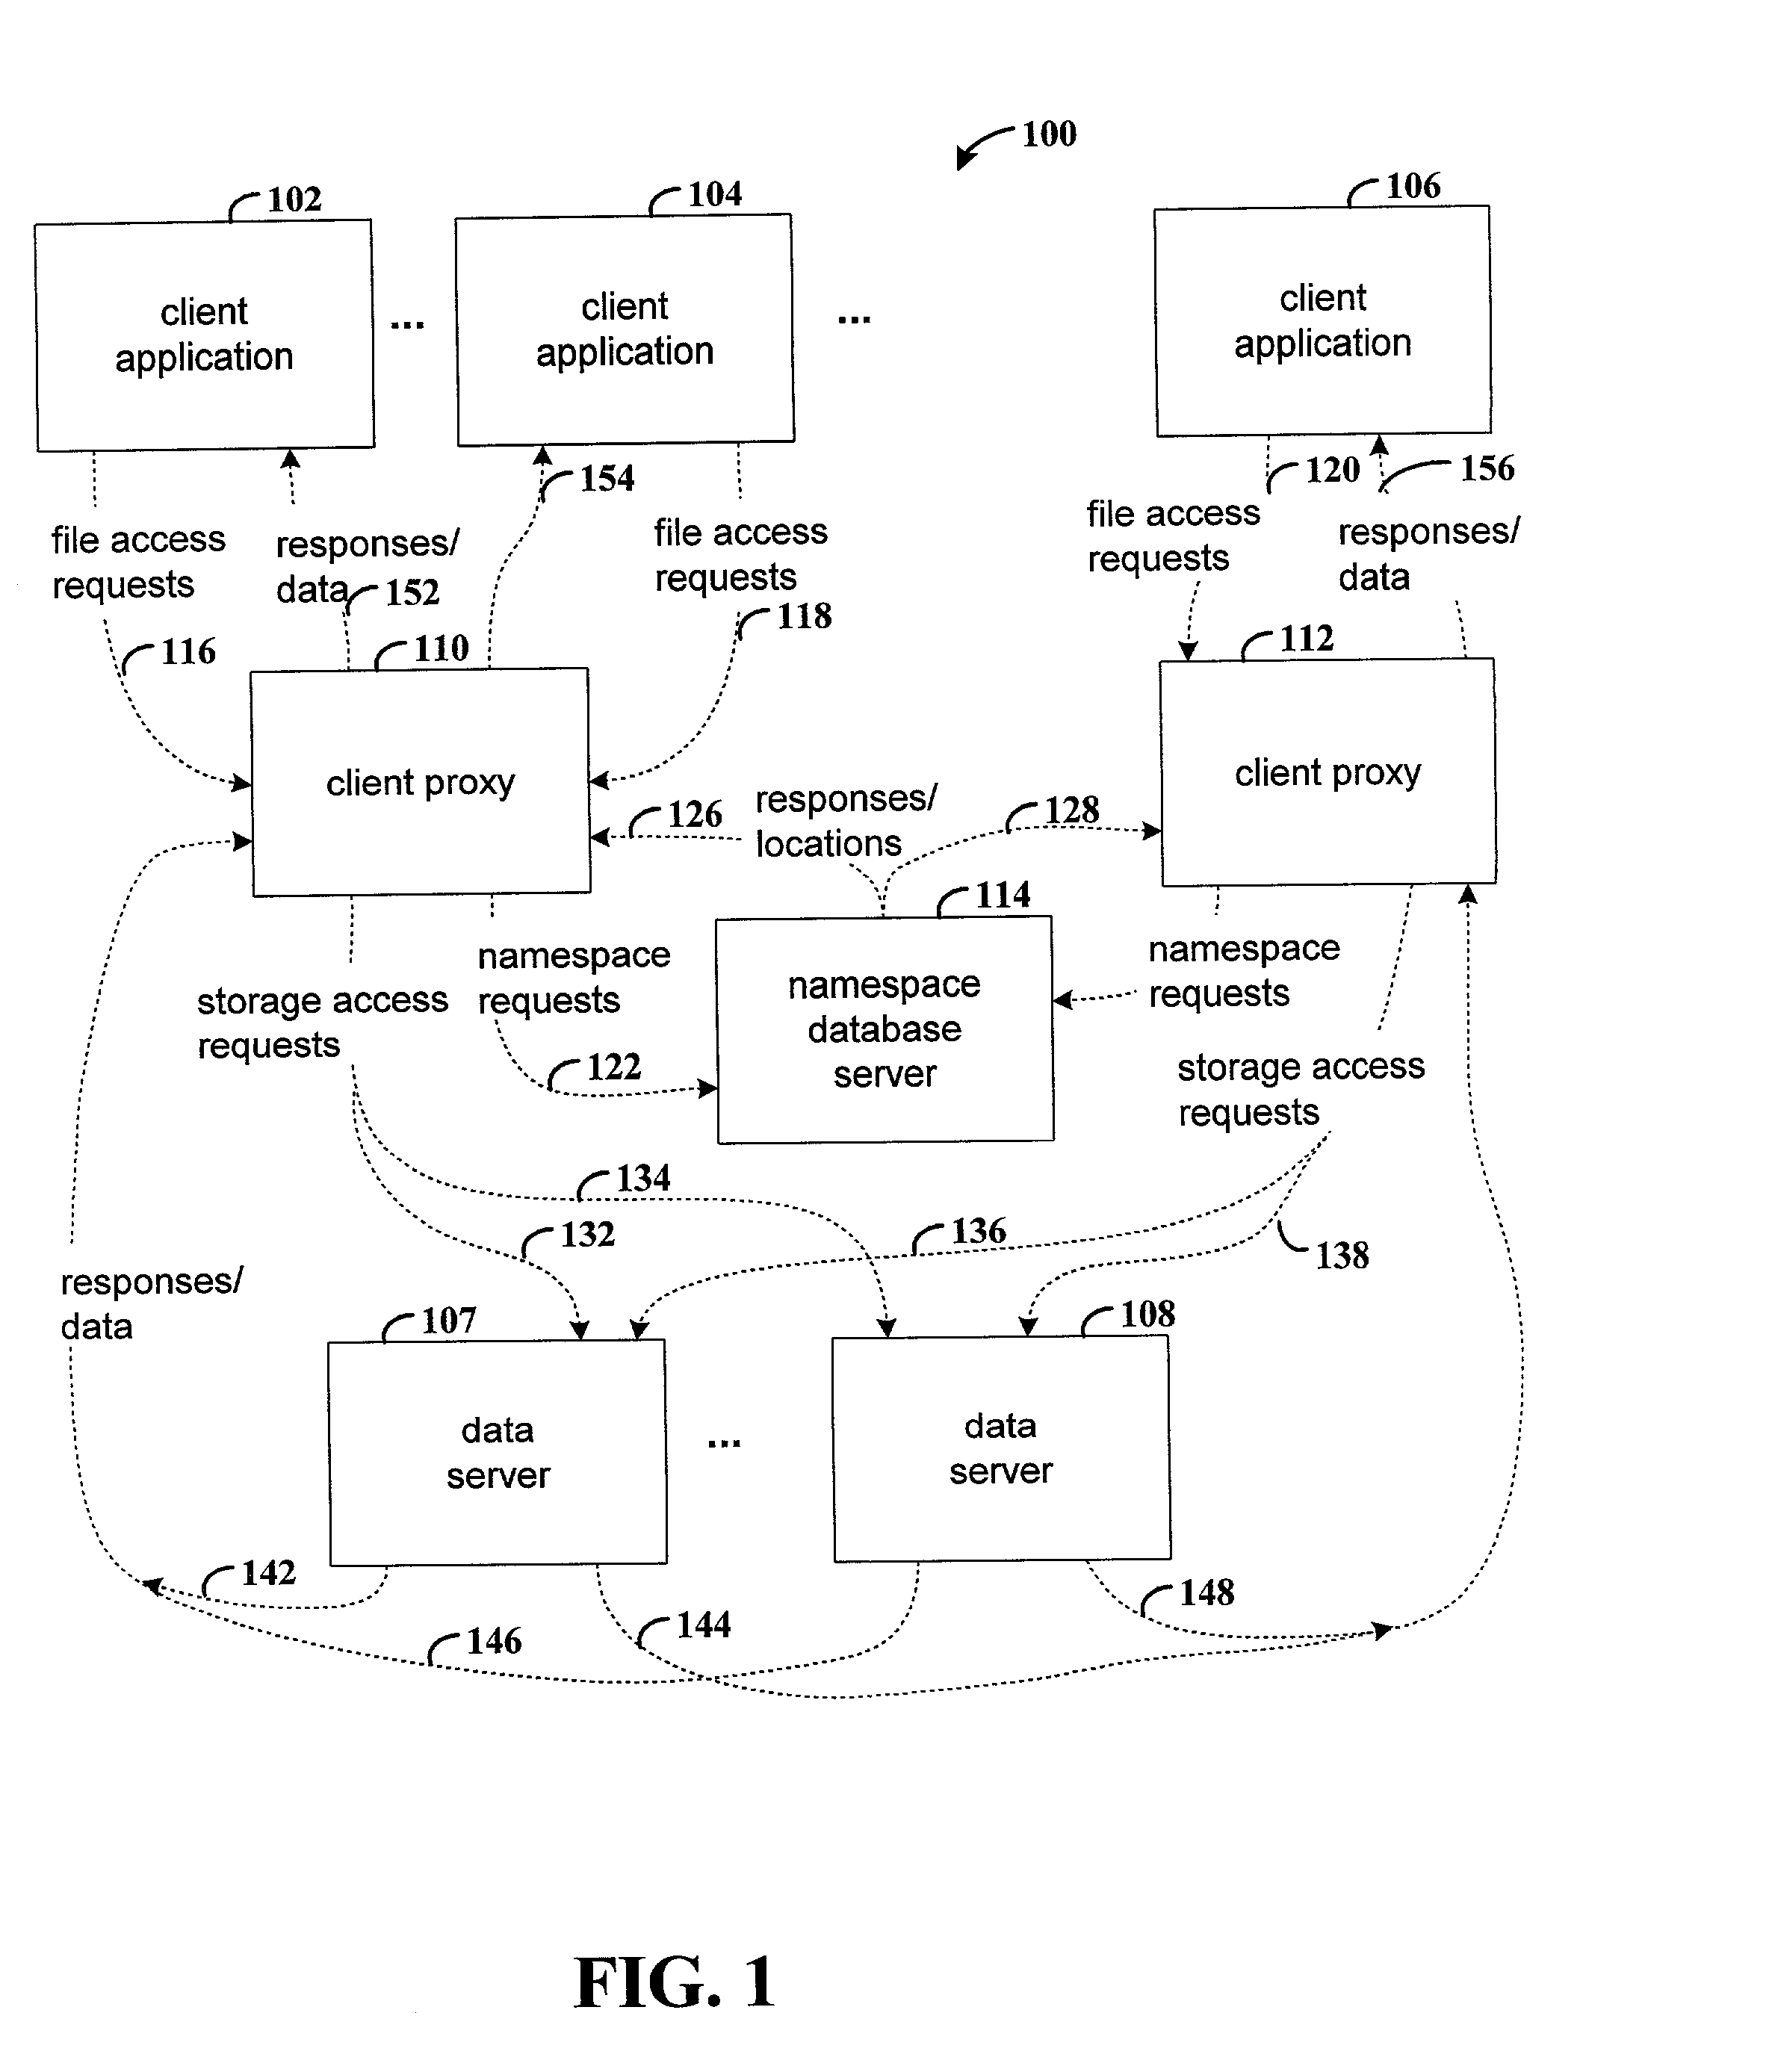 Namespace service in a distributed file system using a database management system